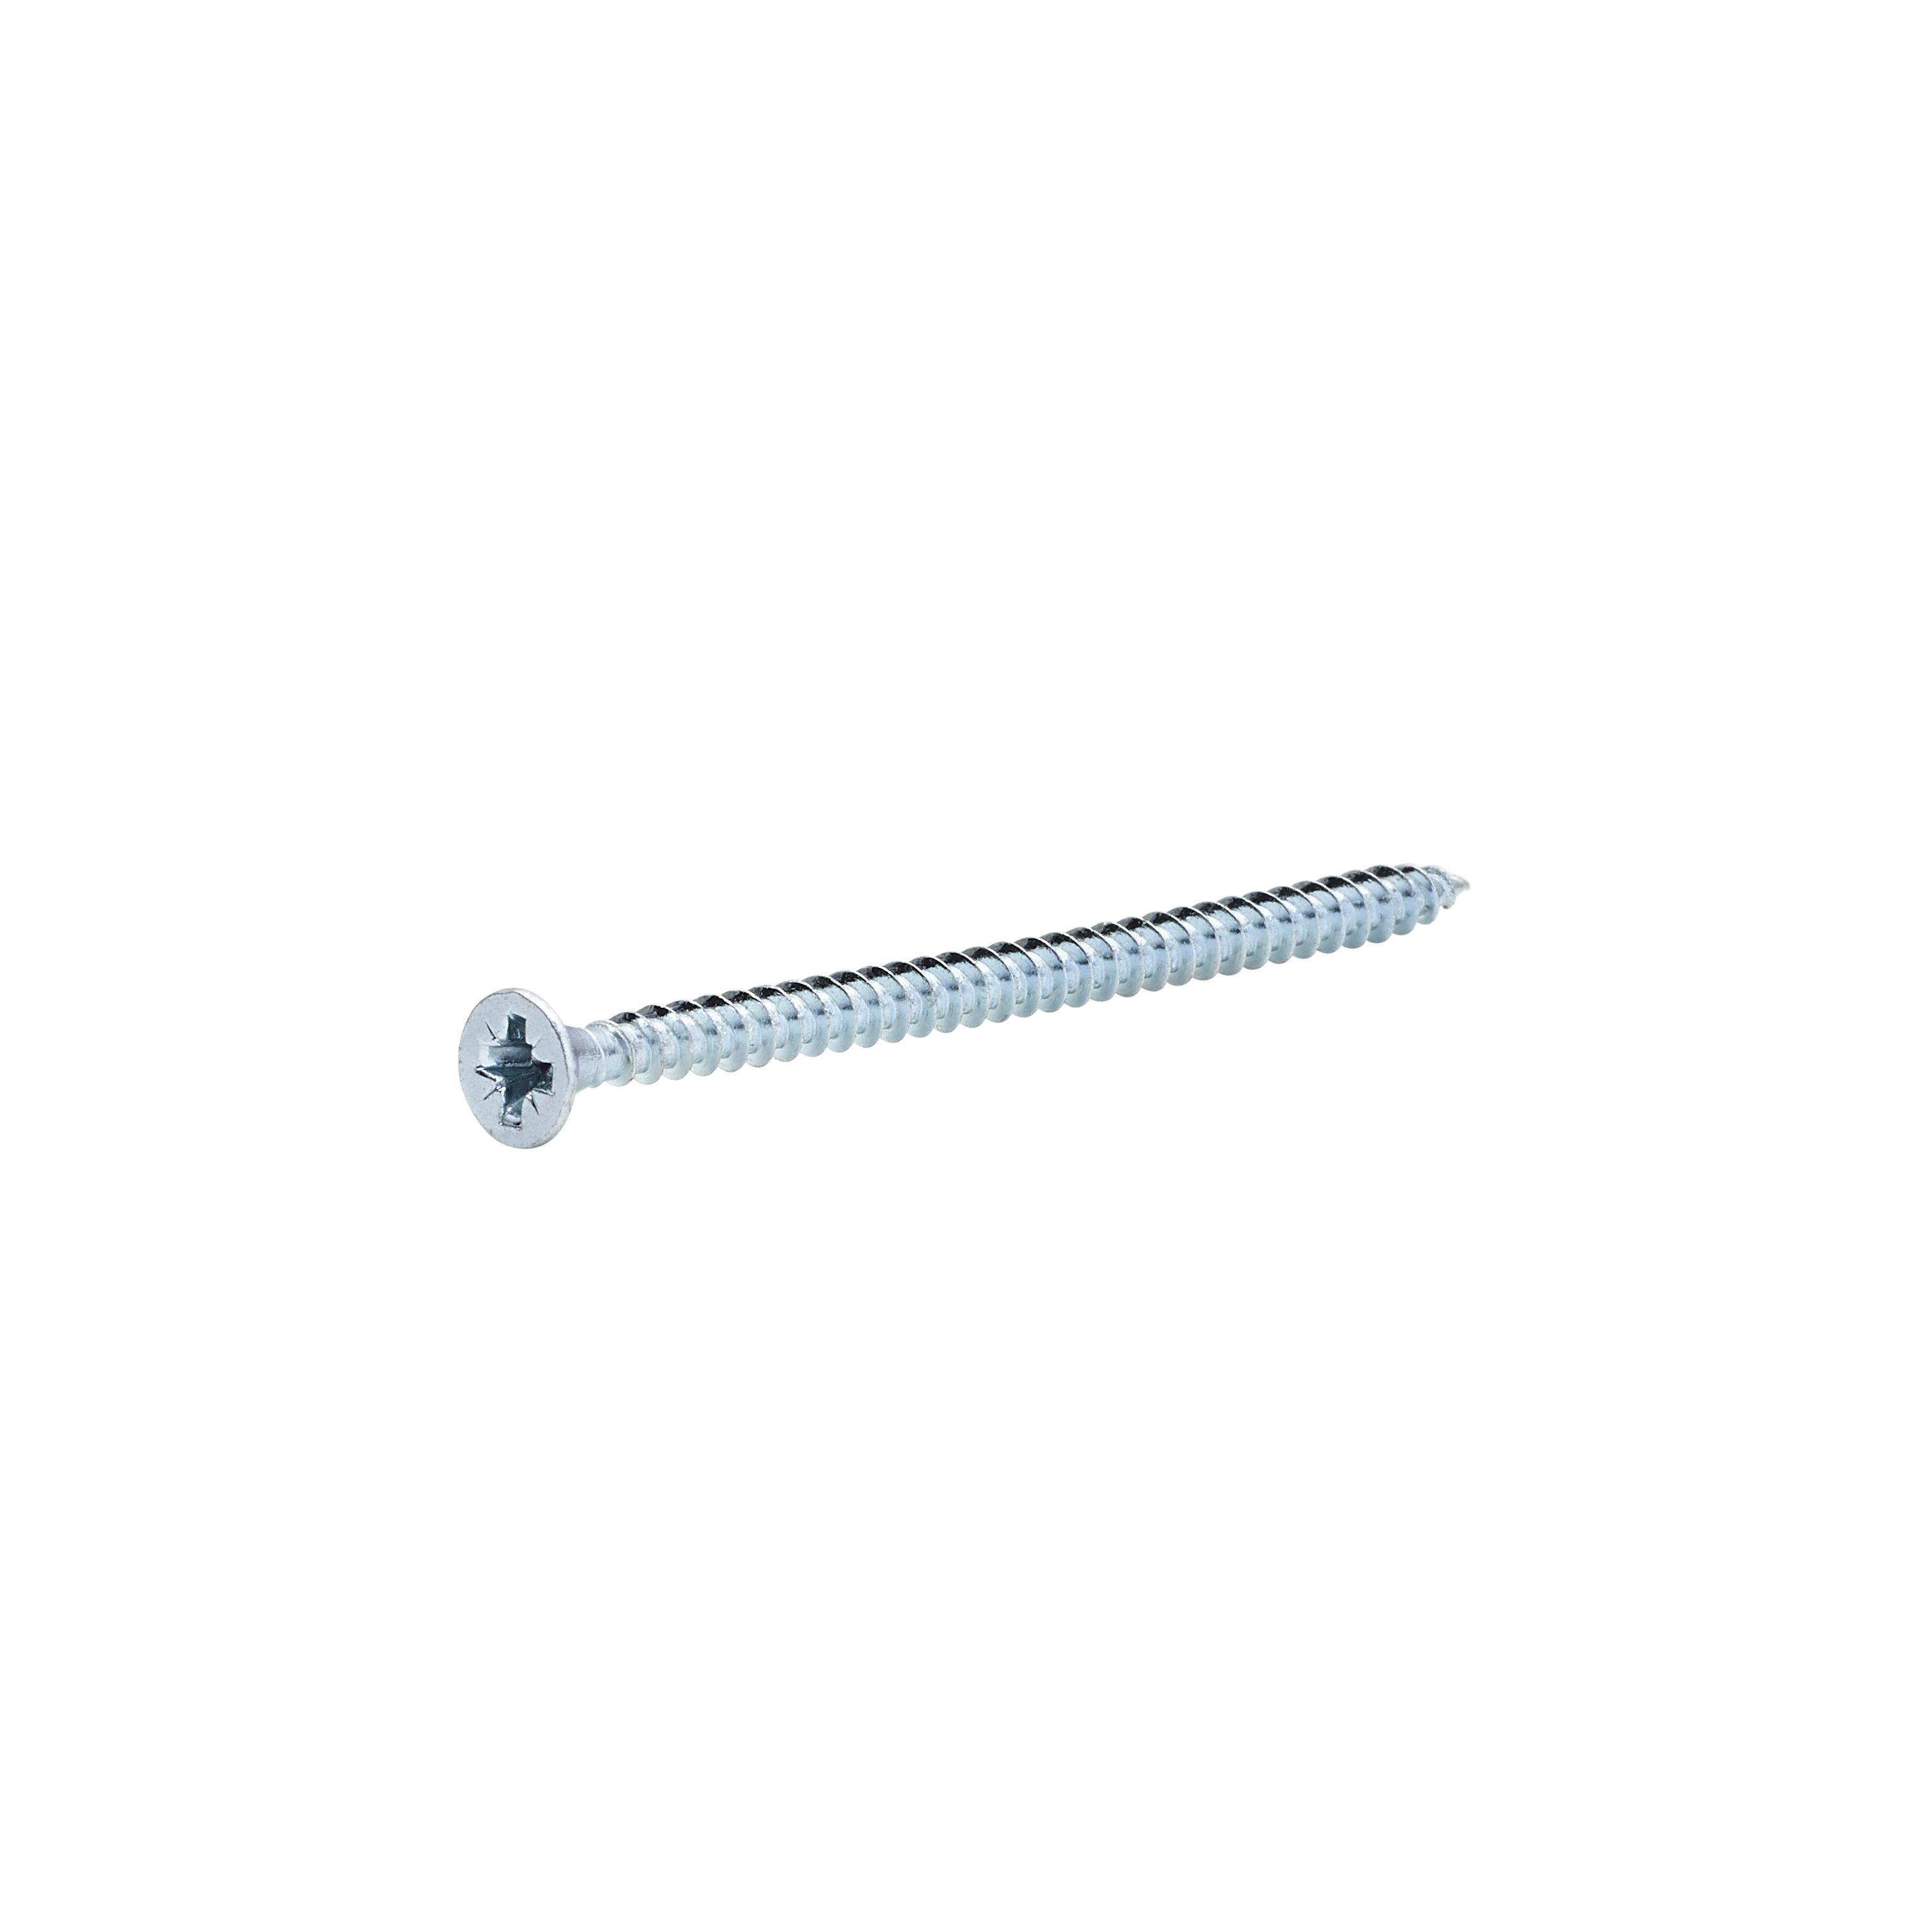 Diall Zinc-plated Carbon steel Screw (Dia)3.5mm (L)60mm, Pack of 20